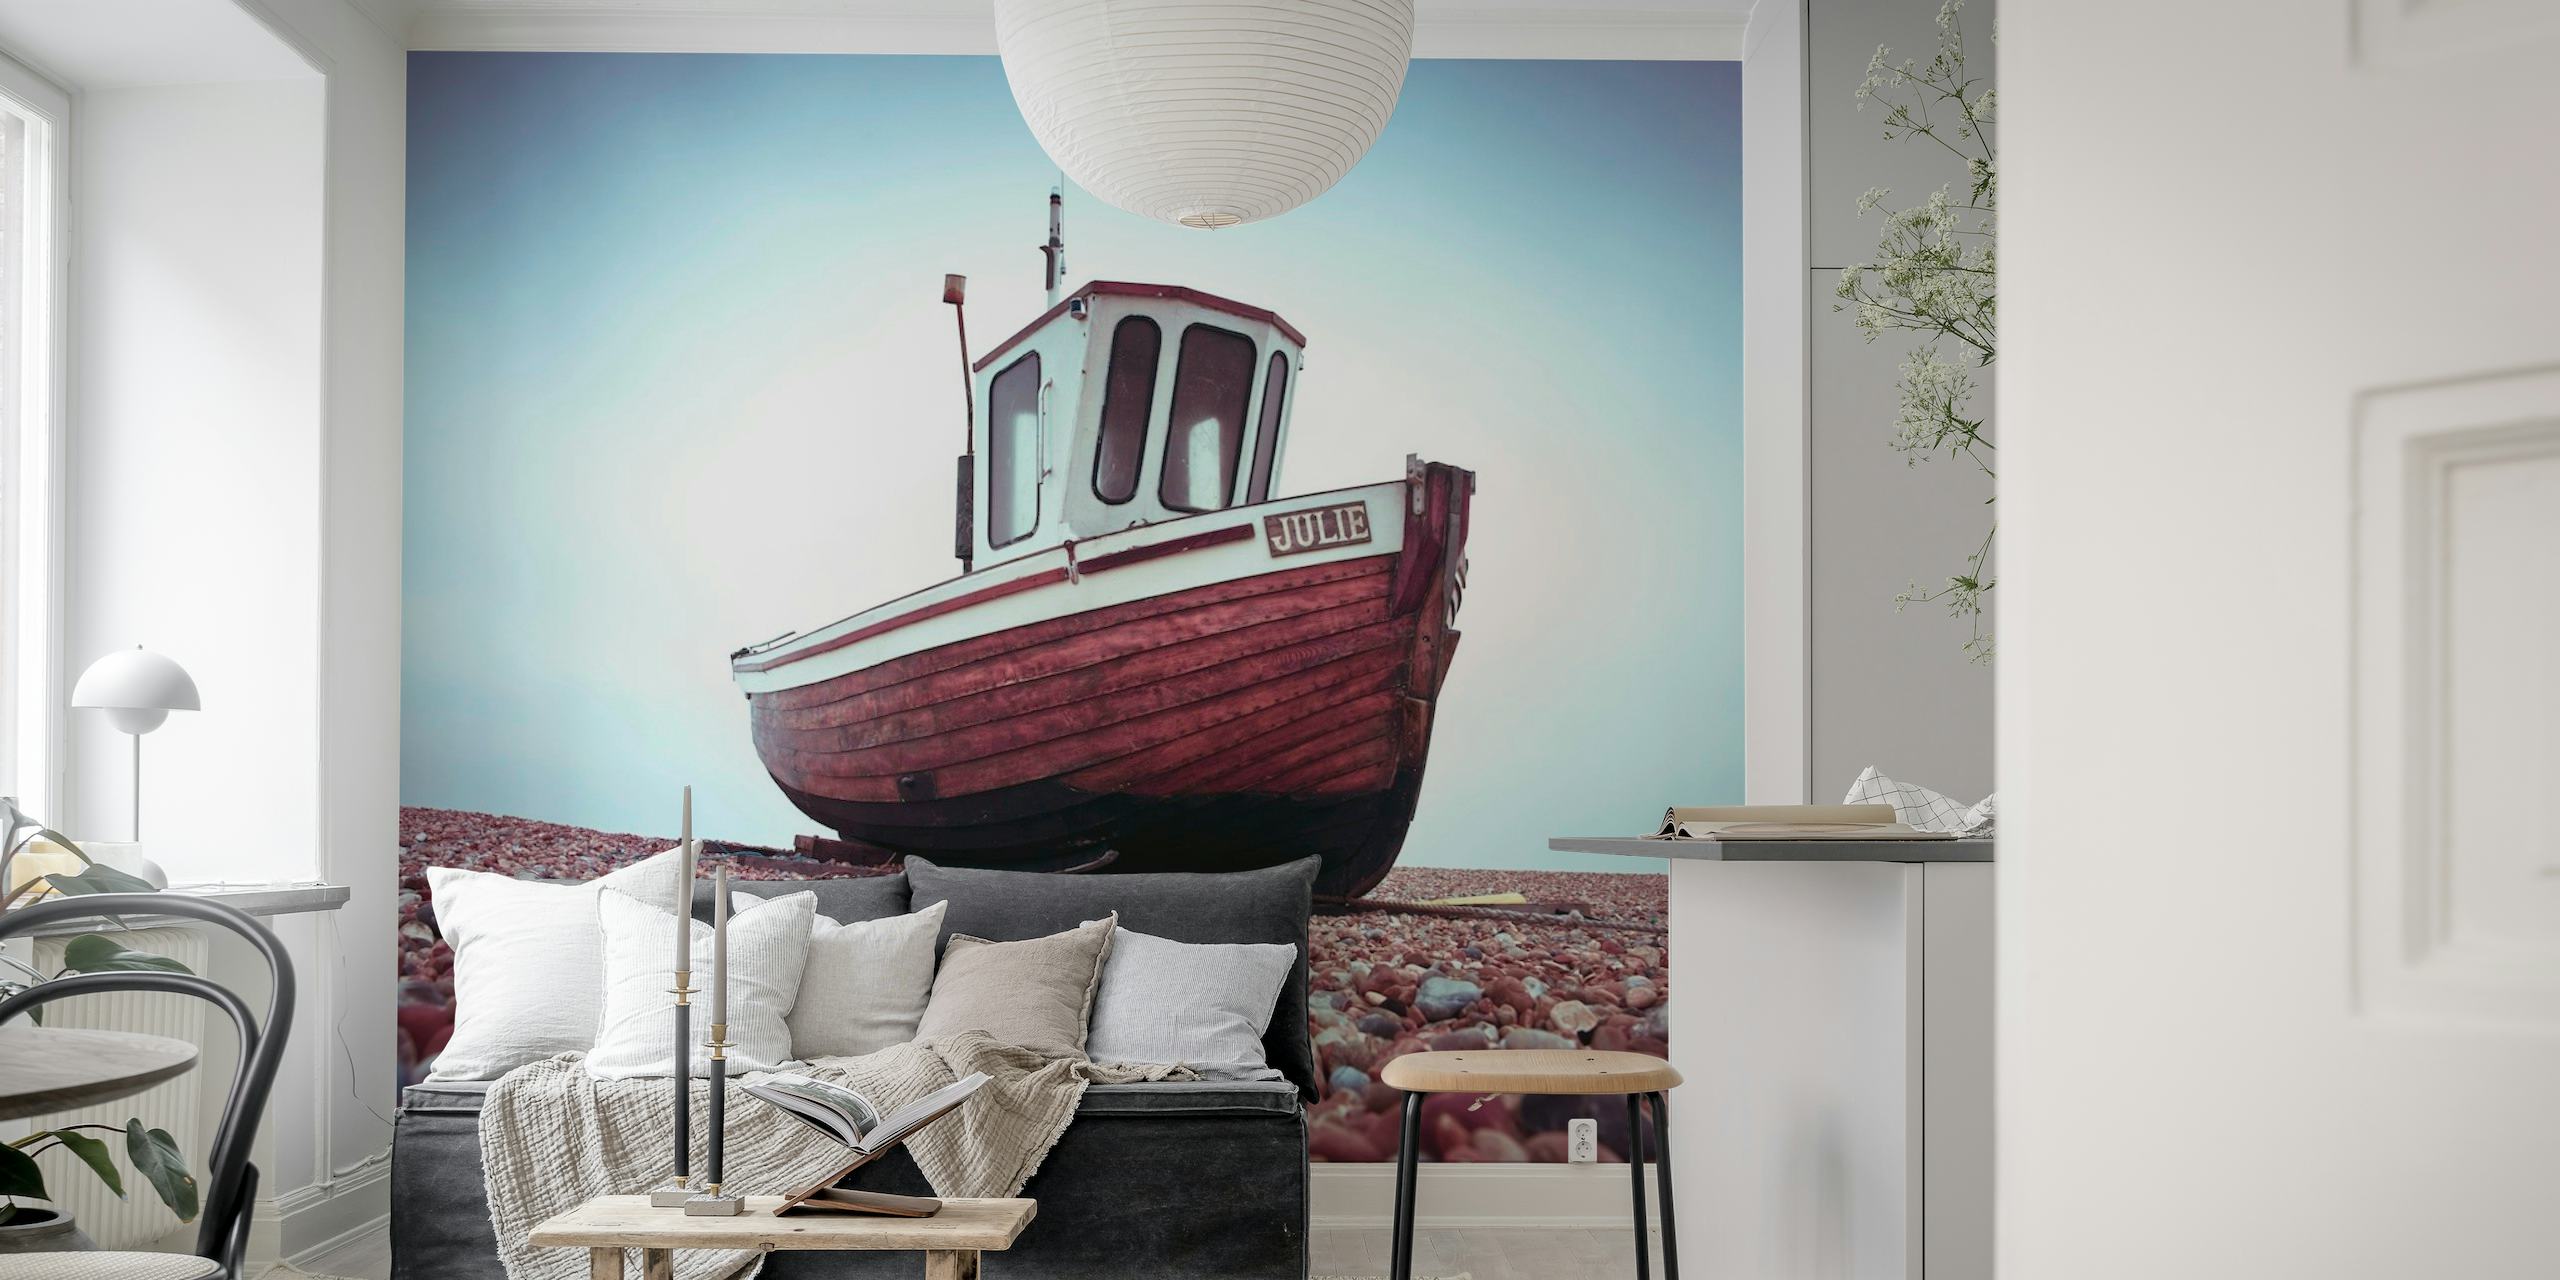 Wall mural of a lone boat on a pebbled beach with overcast skies evoking tranquility and solitude.